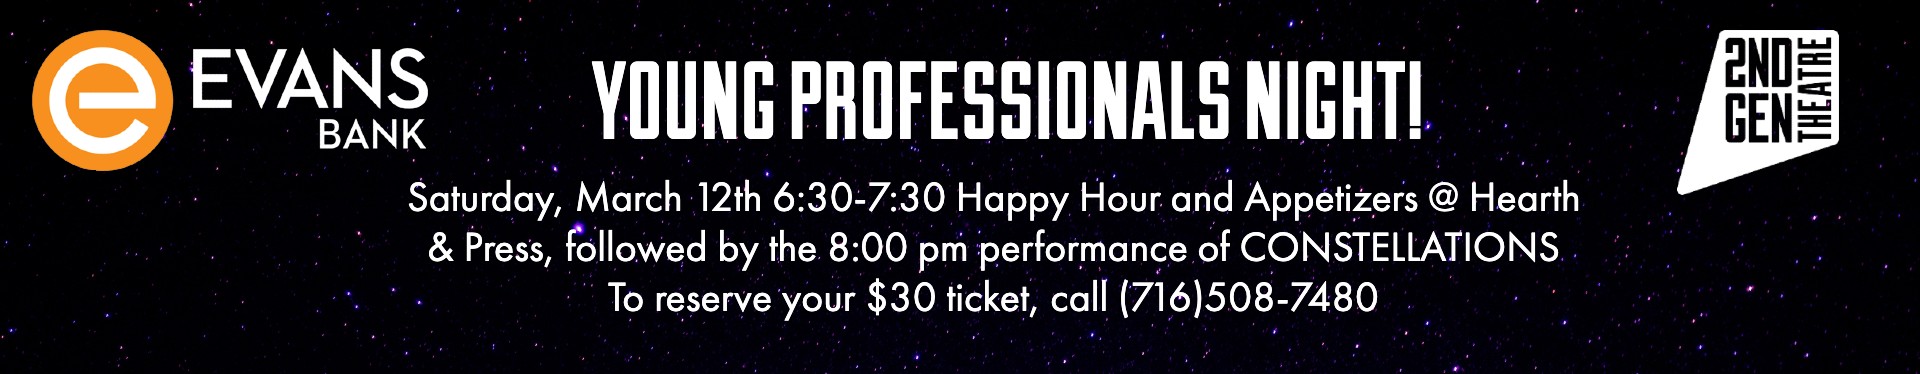 Evans Bank Young professionals night with second generation theatre. 6:30-7:30 happy hour and appetizers at hearth and press and then the 8 pm show of constellations. tickets are $30 and can be bought by calling (716)508-7480